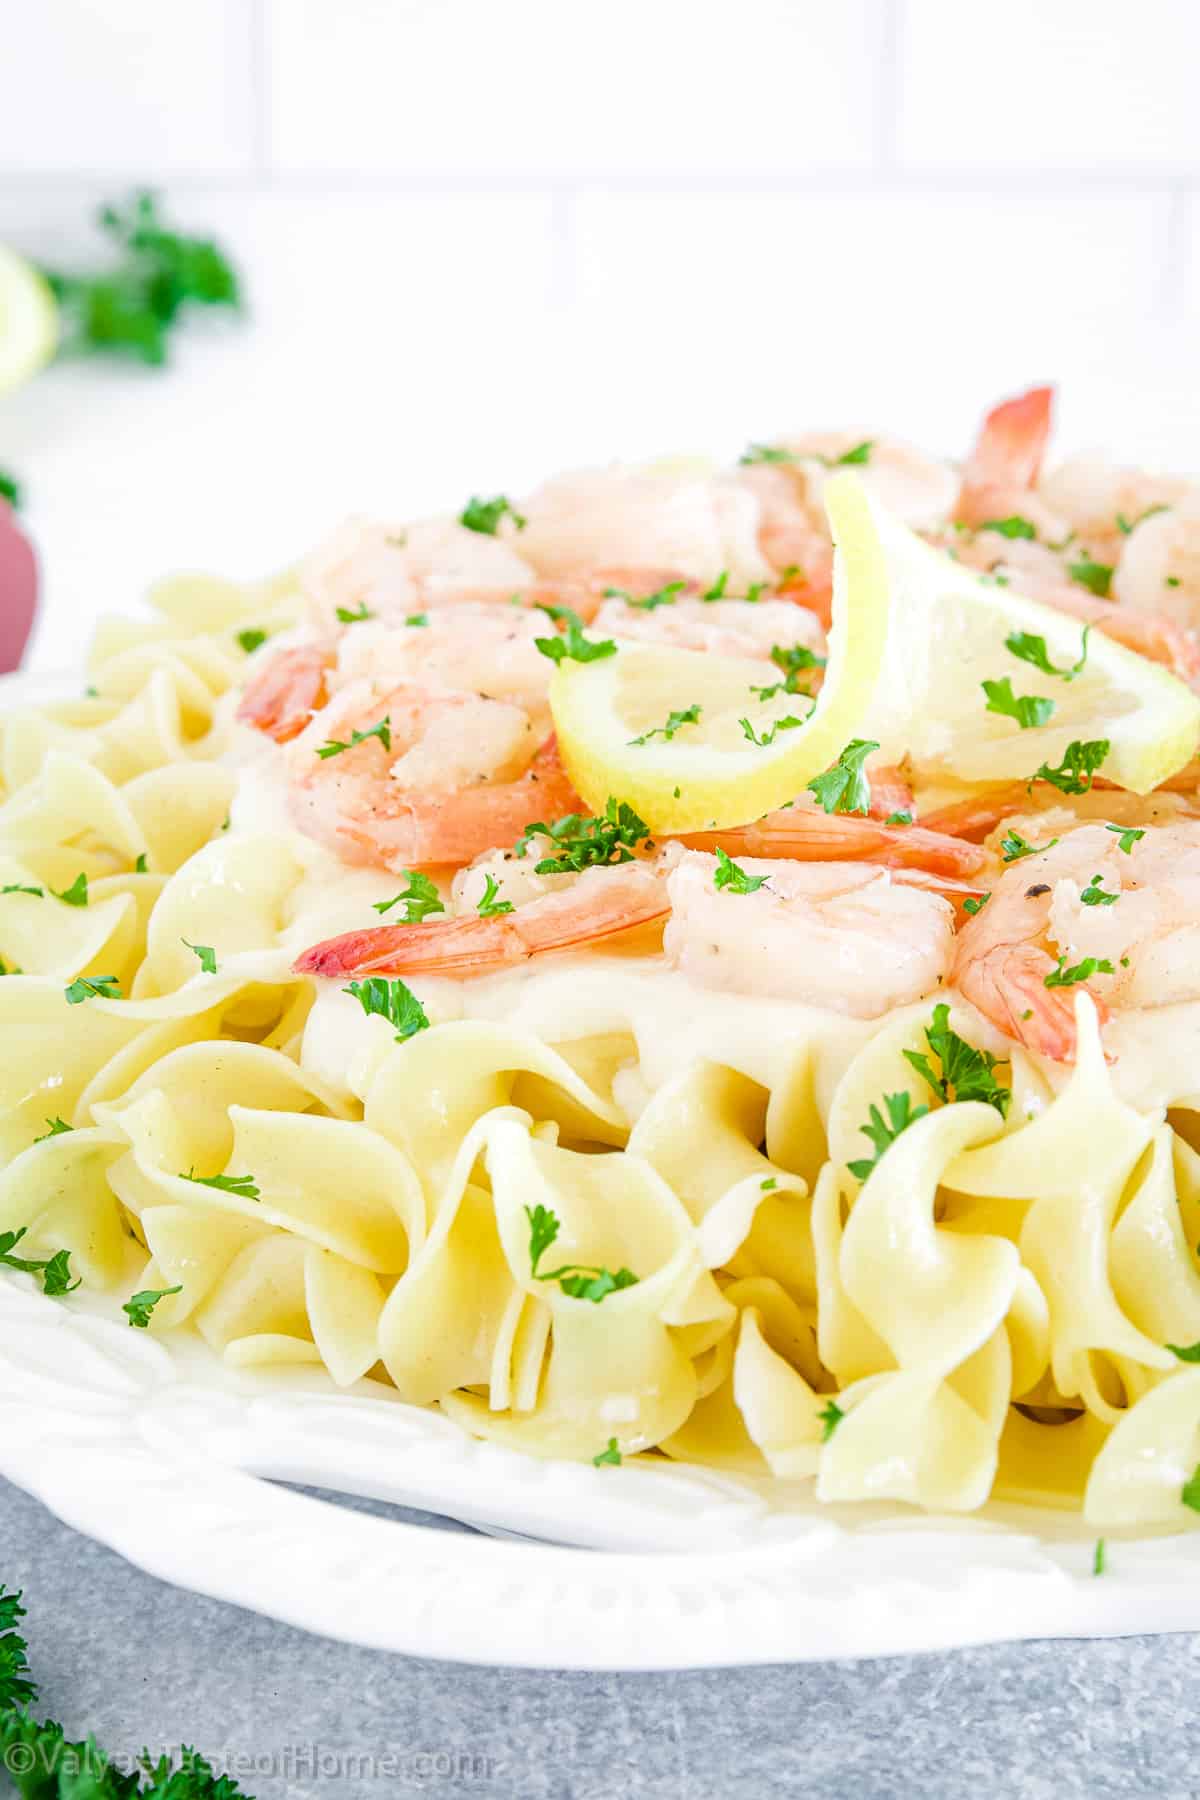 Shrimp alfredo pasta is a delectable Italian-inspired dish made out of juicy shrimp, al dente pasta, and a creamy homemade Alfredo sauce.